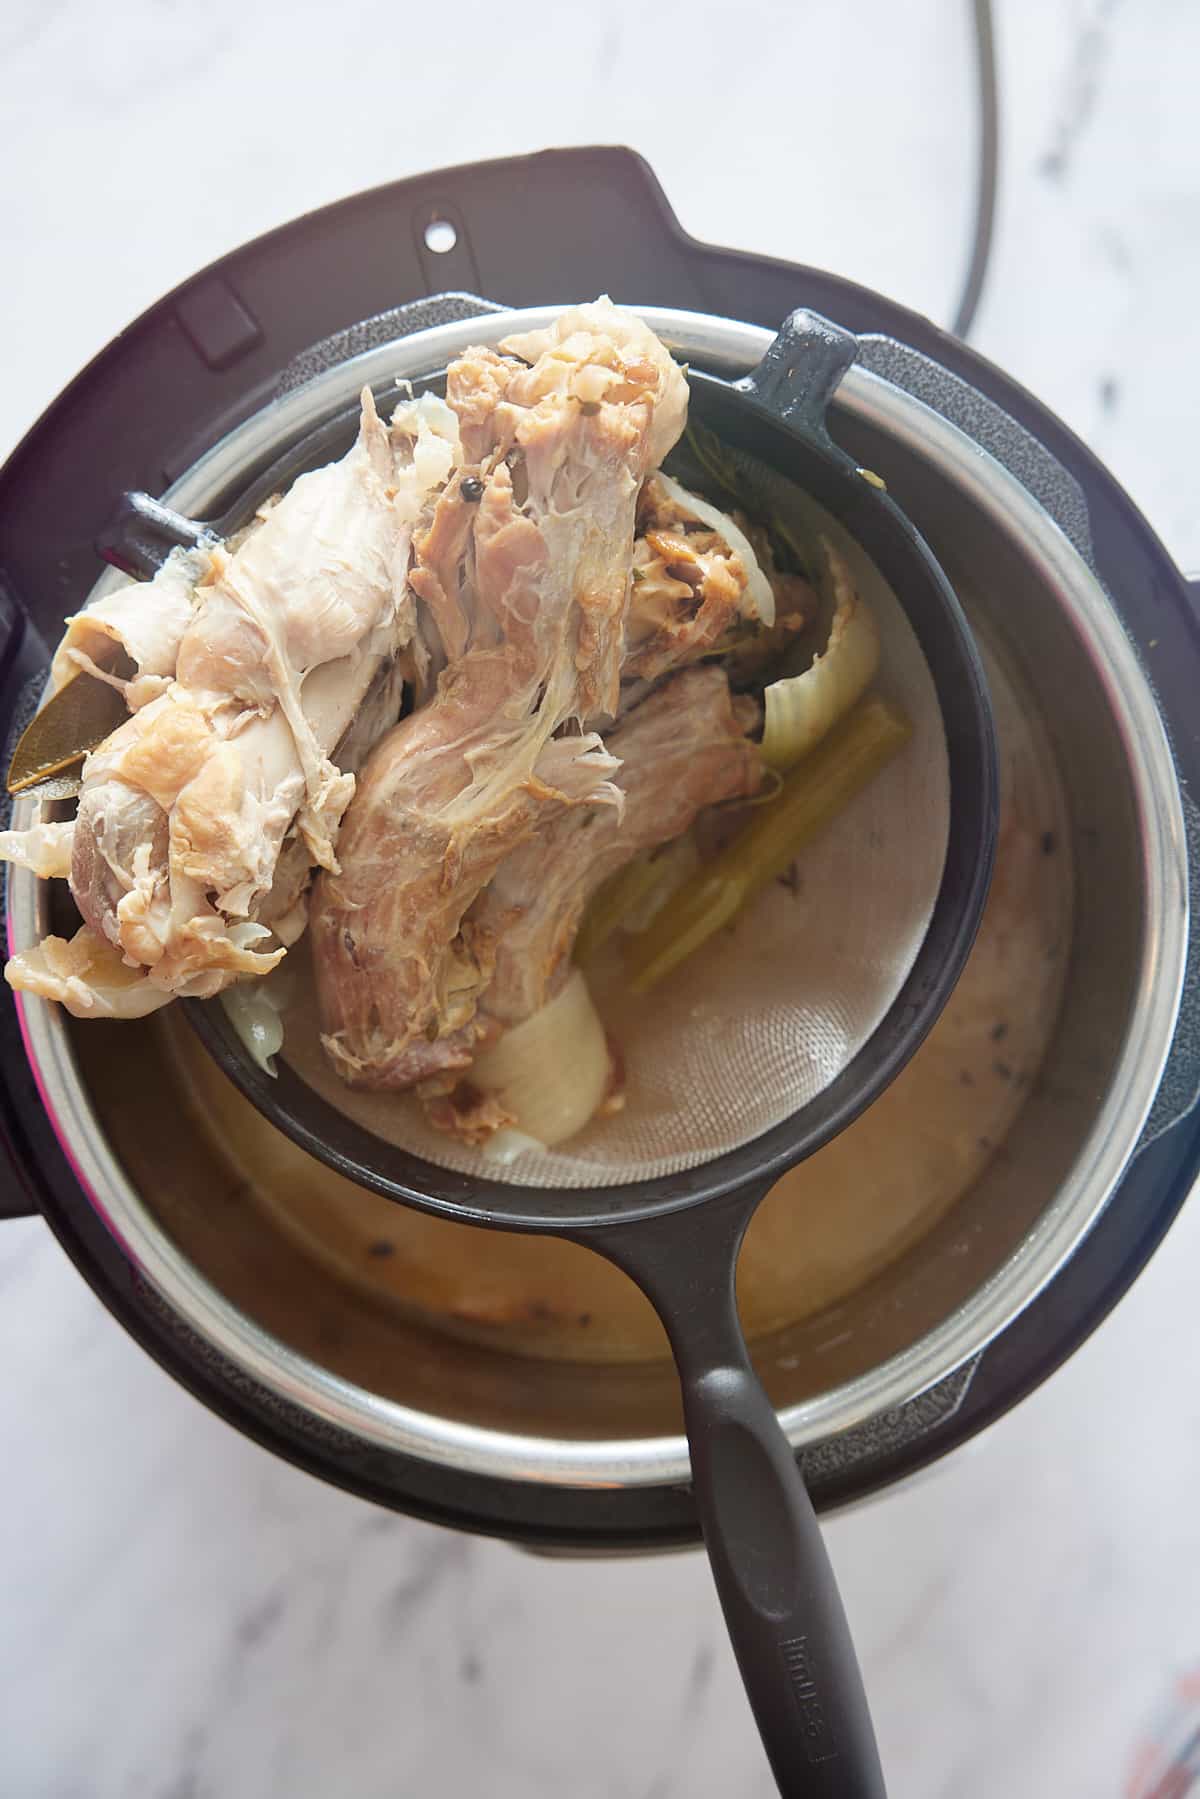 Sieve filled with cooked turkey pieces and vegetables ready for discarding